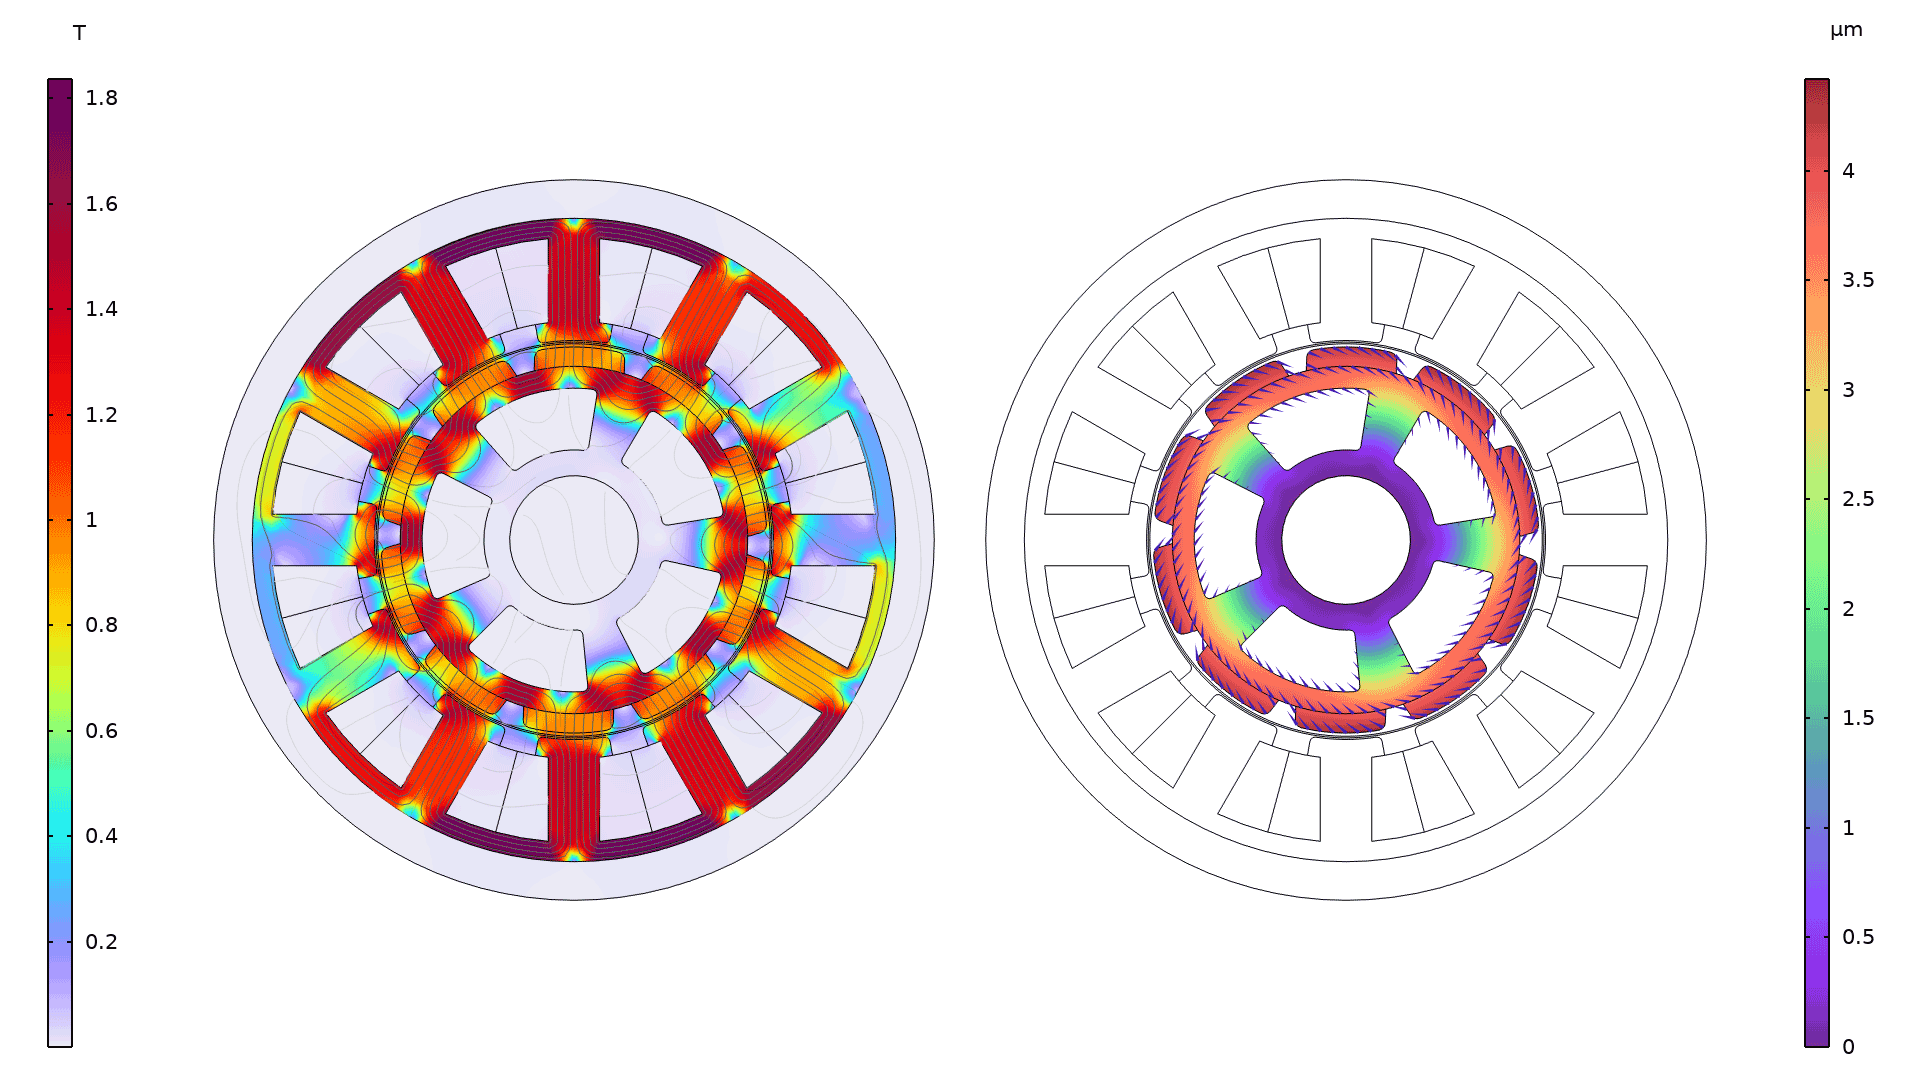 Two motor plots, with the magnetic field shown on the left and the displacement shown on the right.